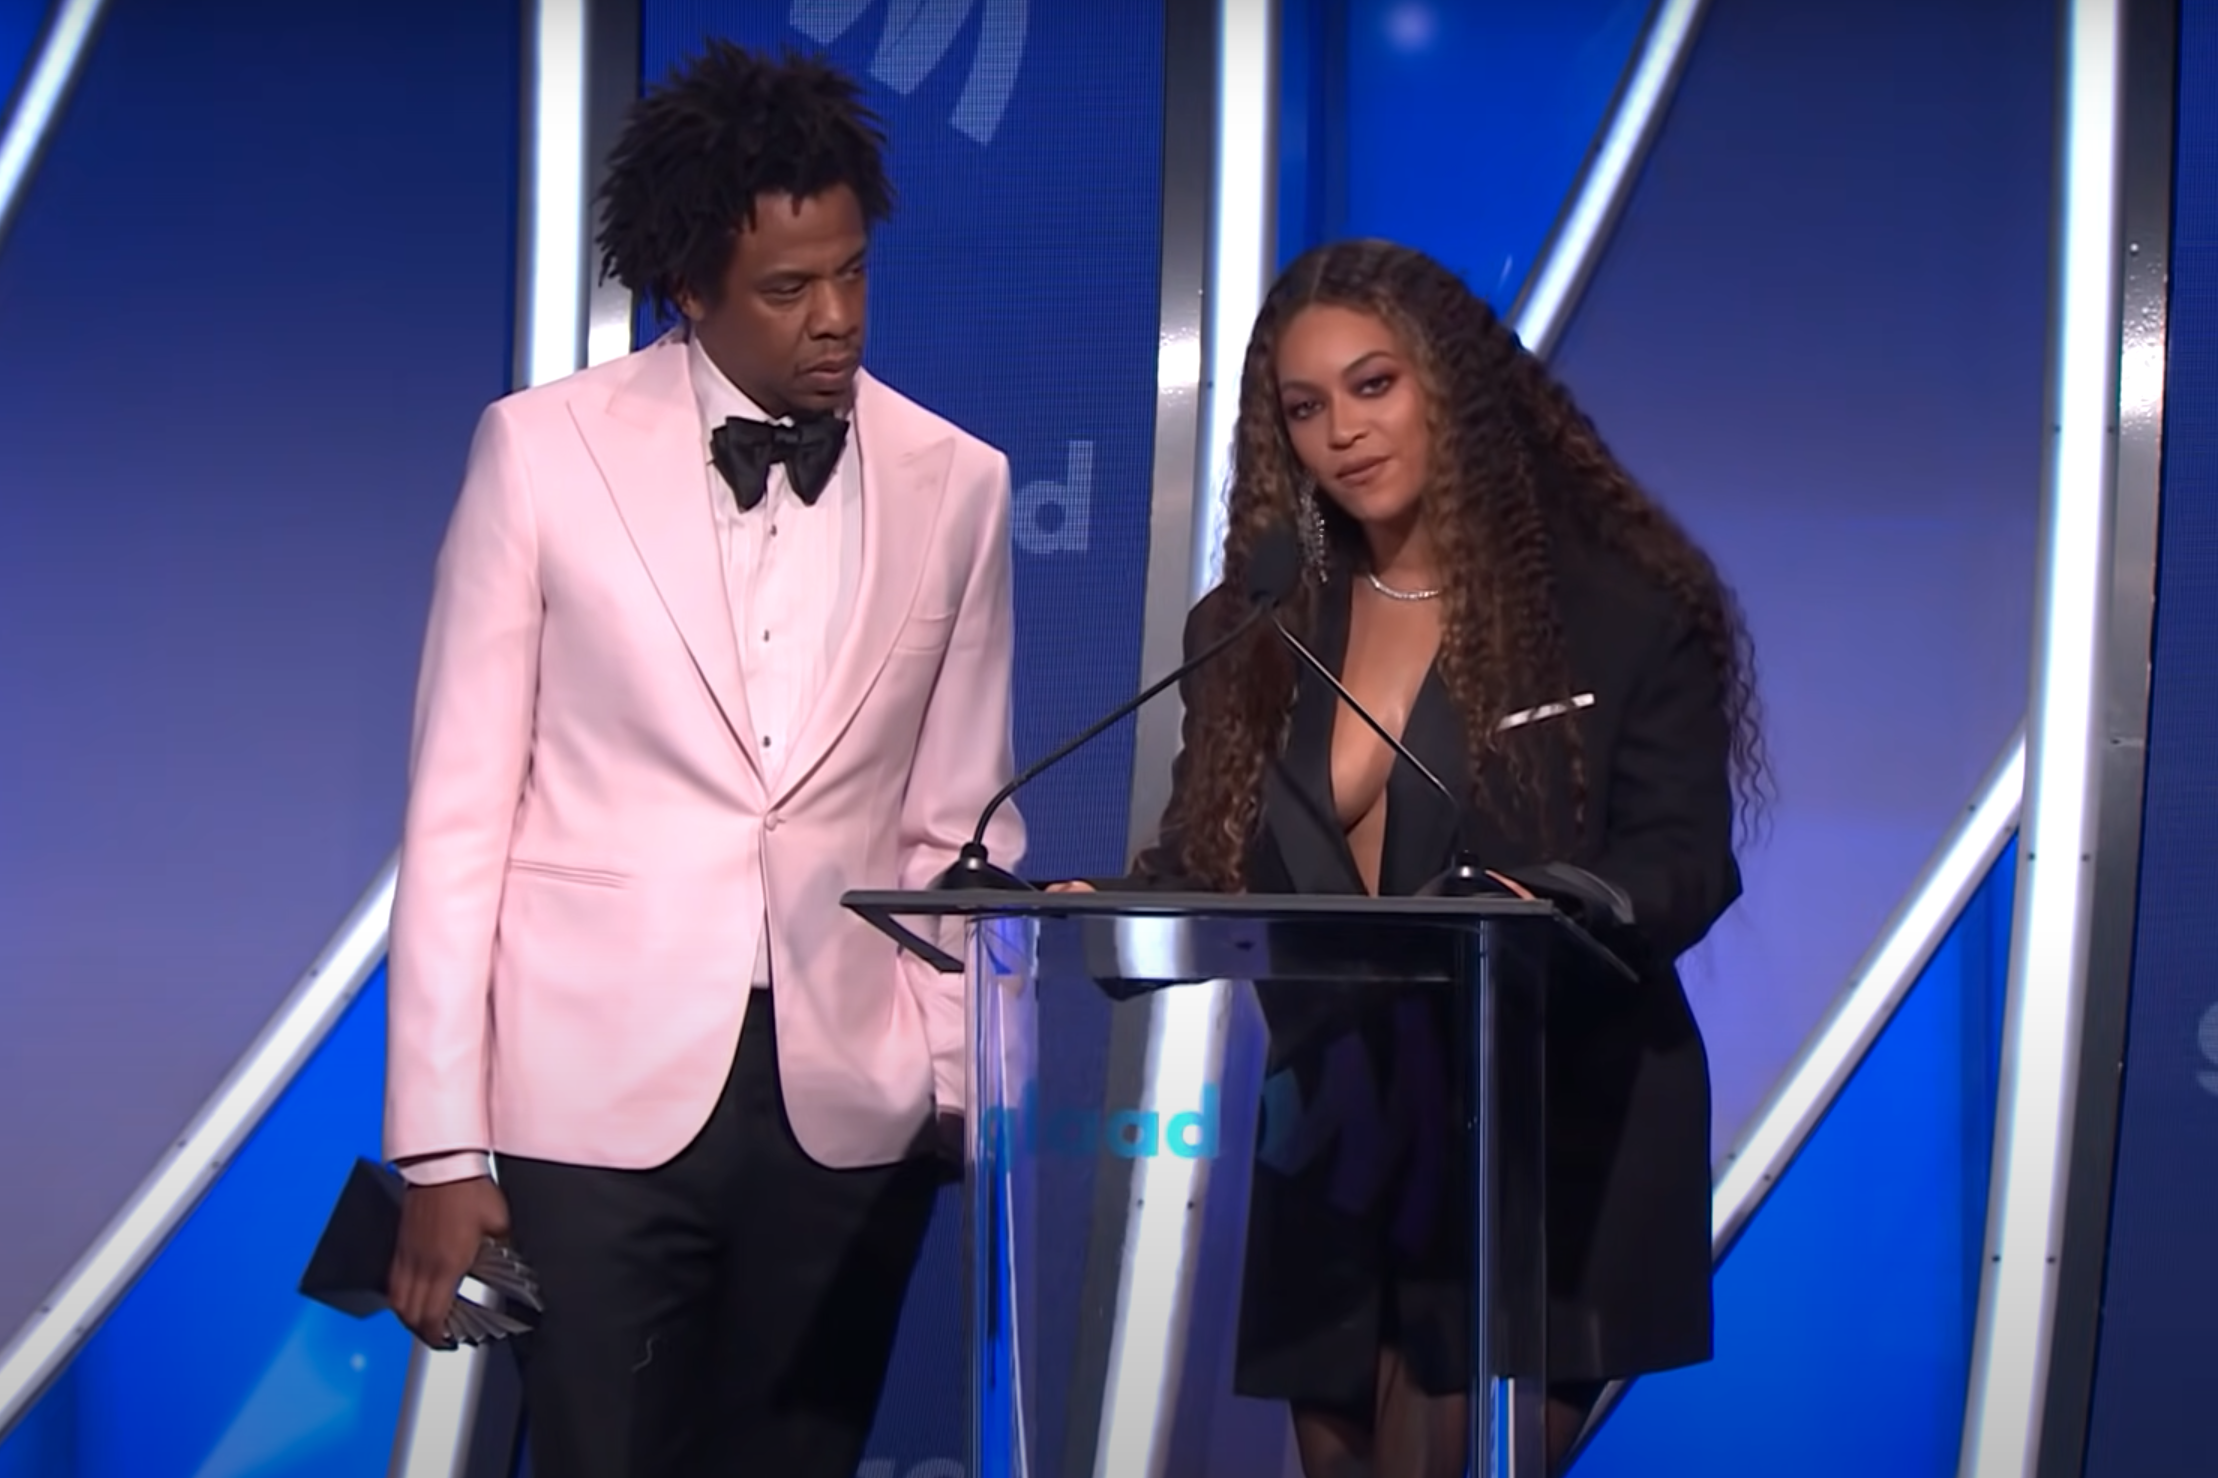 Beyonce and JAY-Z, 2019 | Source: youtube.com/@glaad